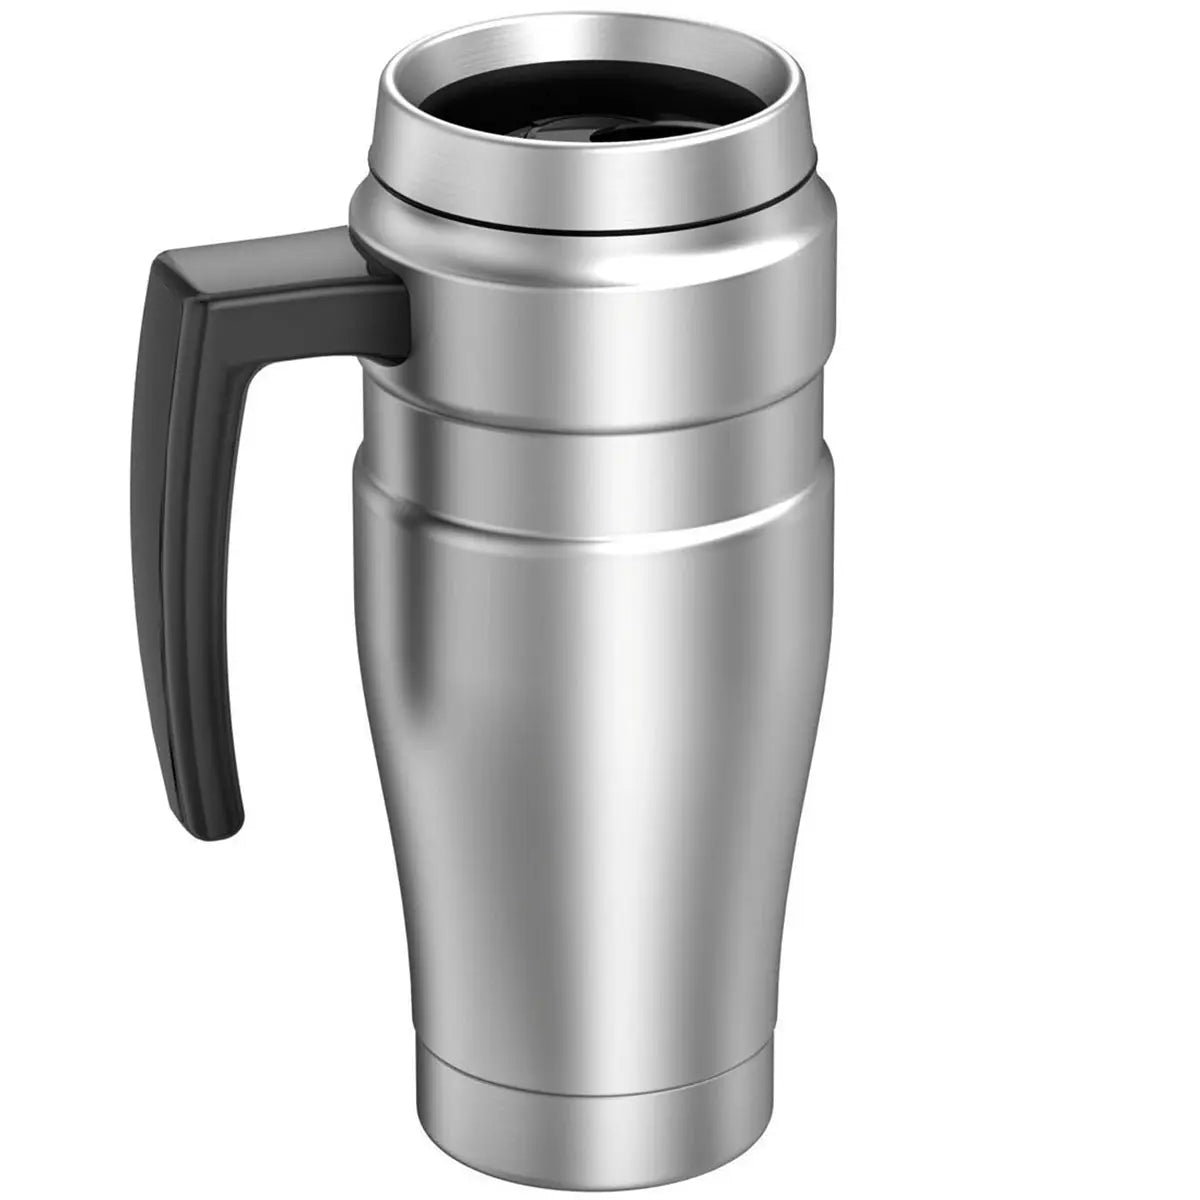 Thermos 16 oz. Stainless King Insulated Stainless Steel Travel Mug with Handle Thermos